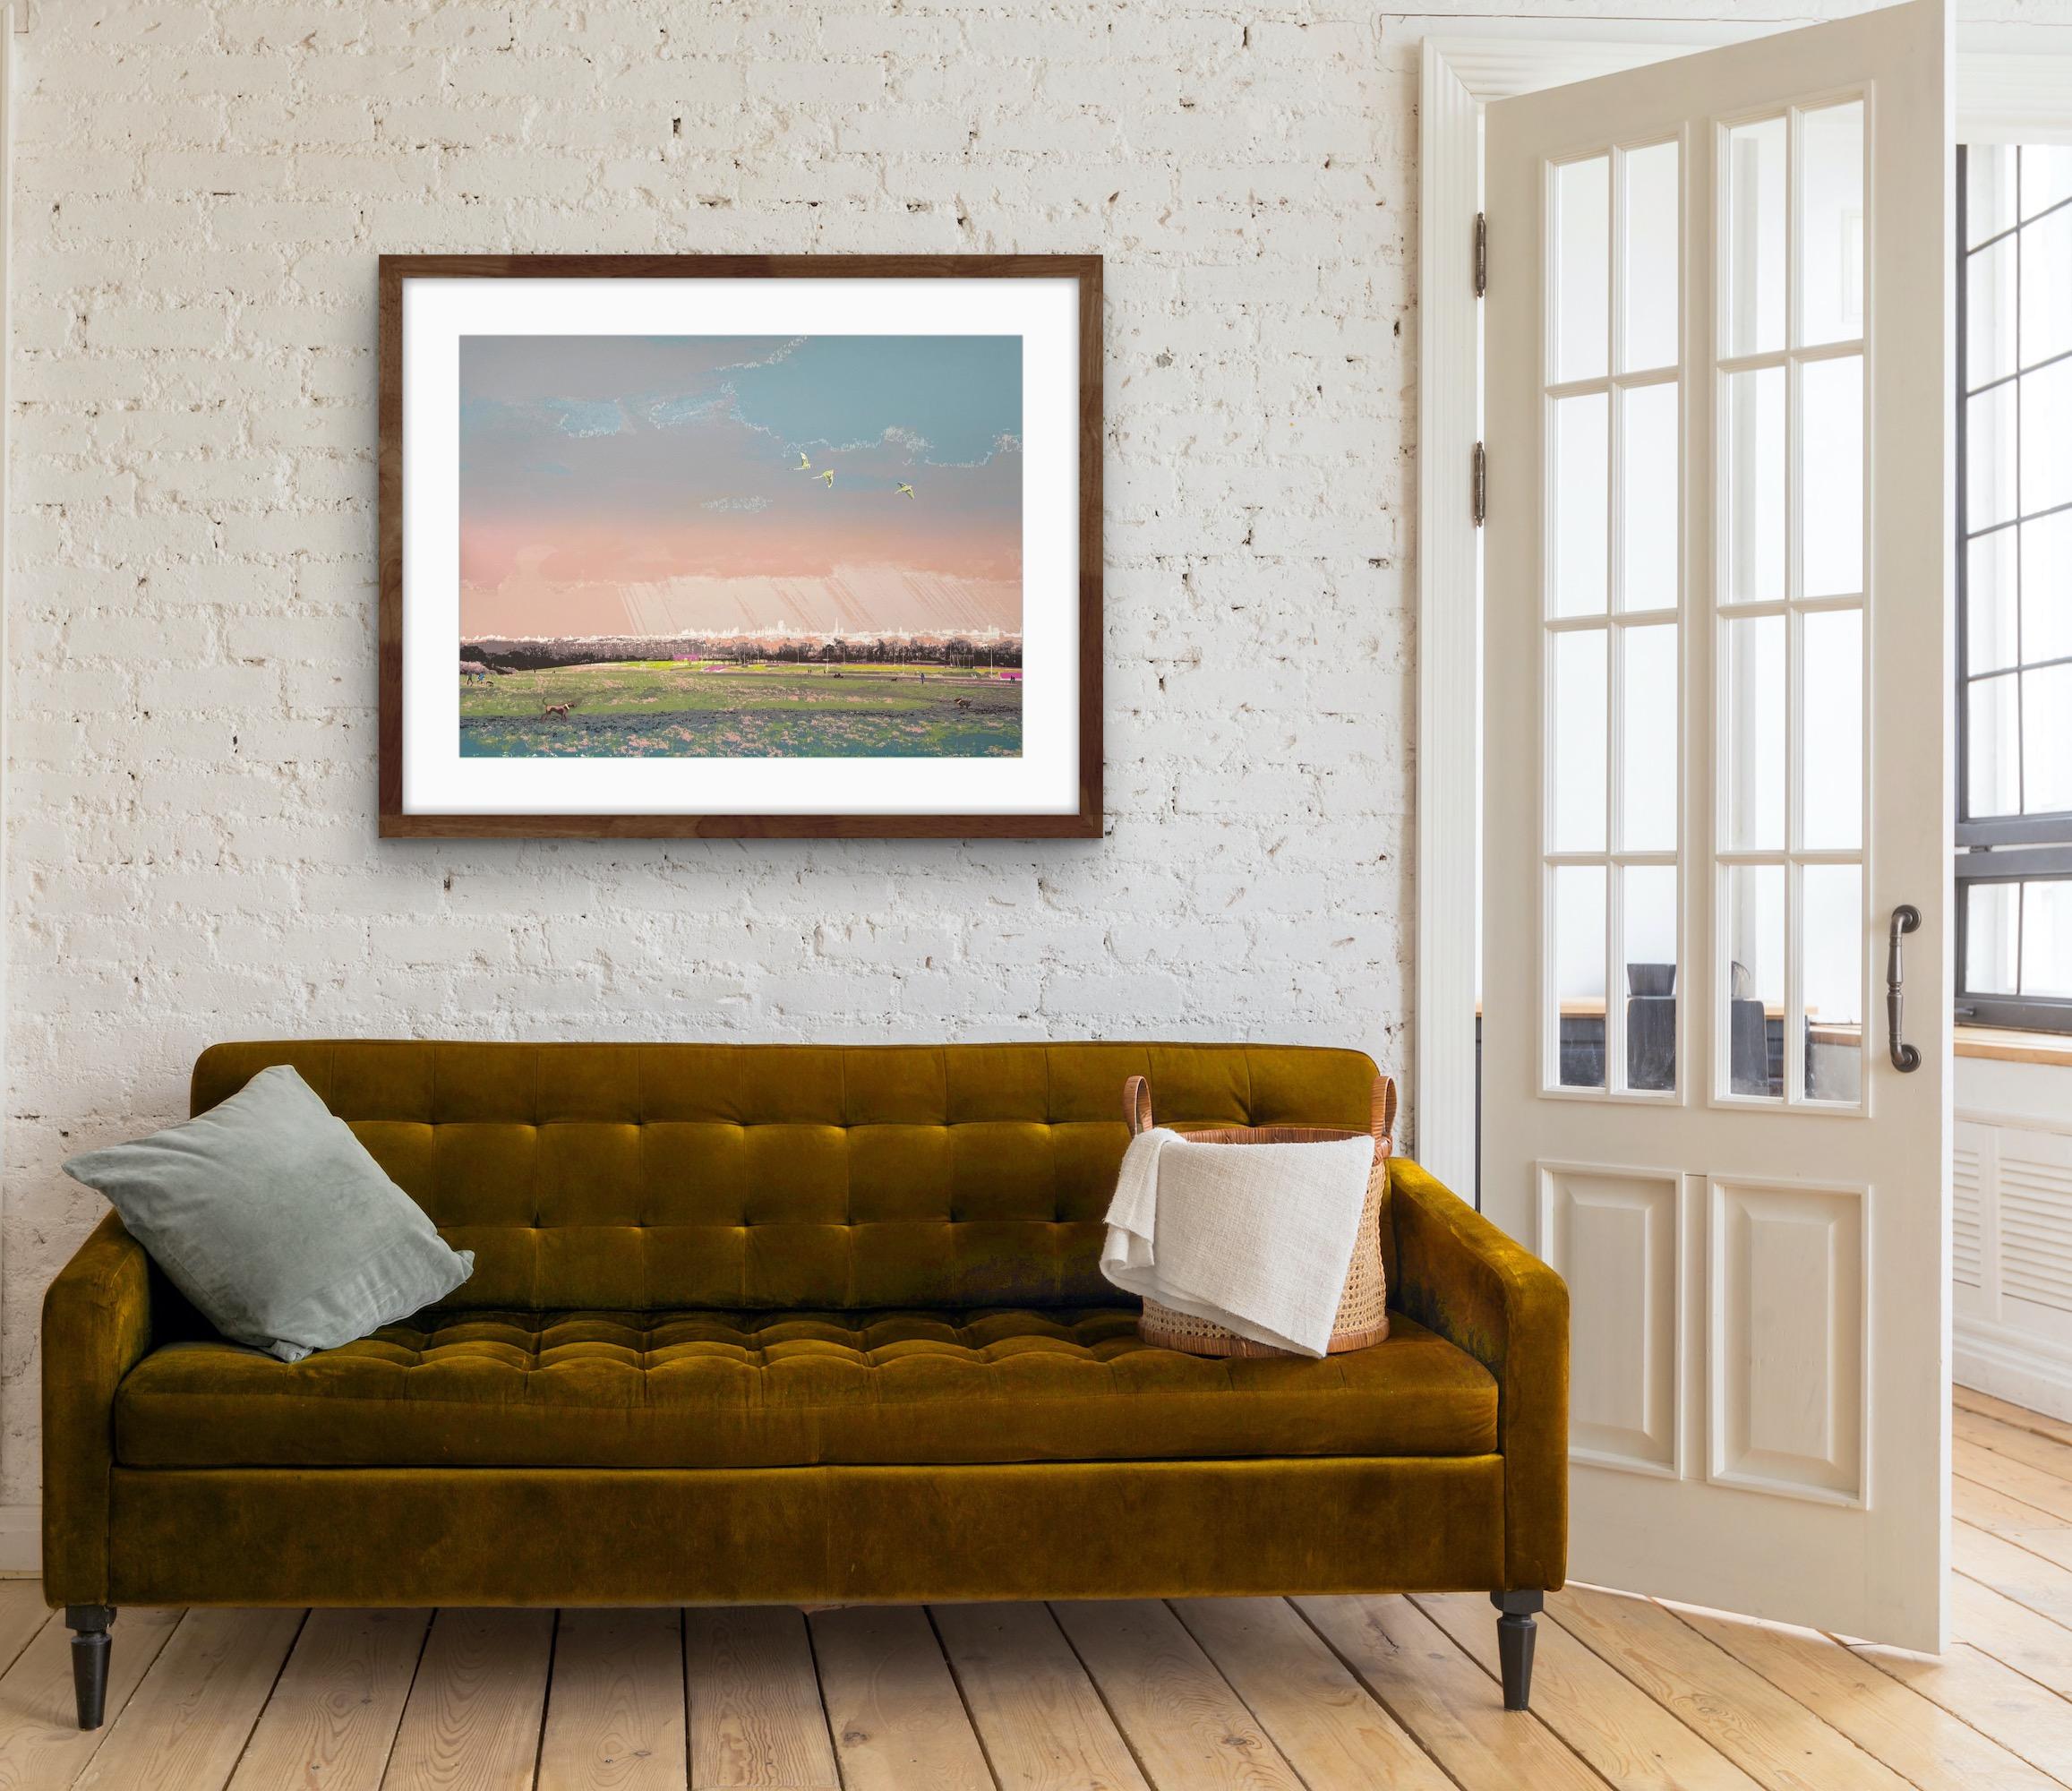 Heath Life, skyscape art, landscape art, limited edition print, affordable art - Contemporary Print by Emma Reynolds